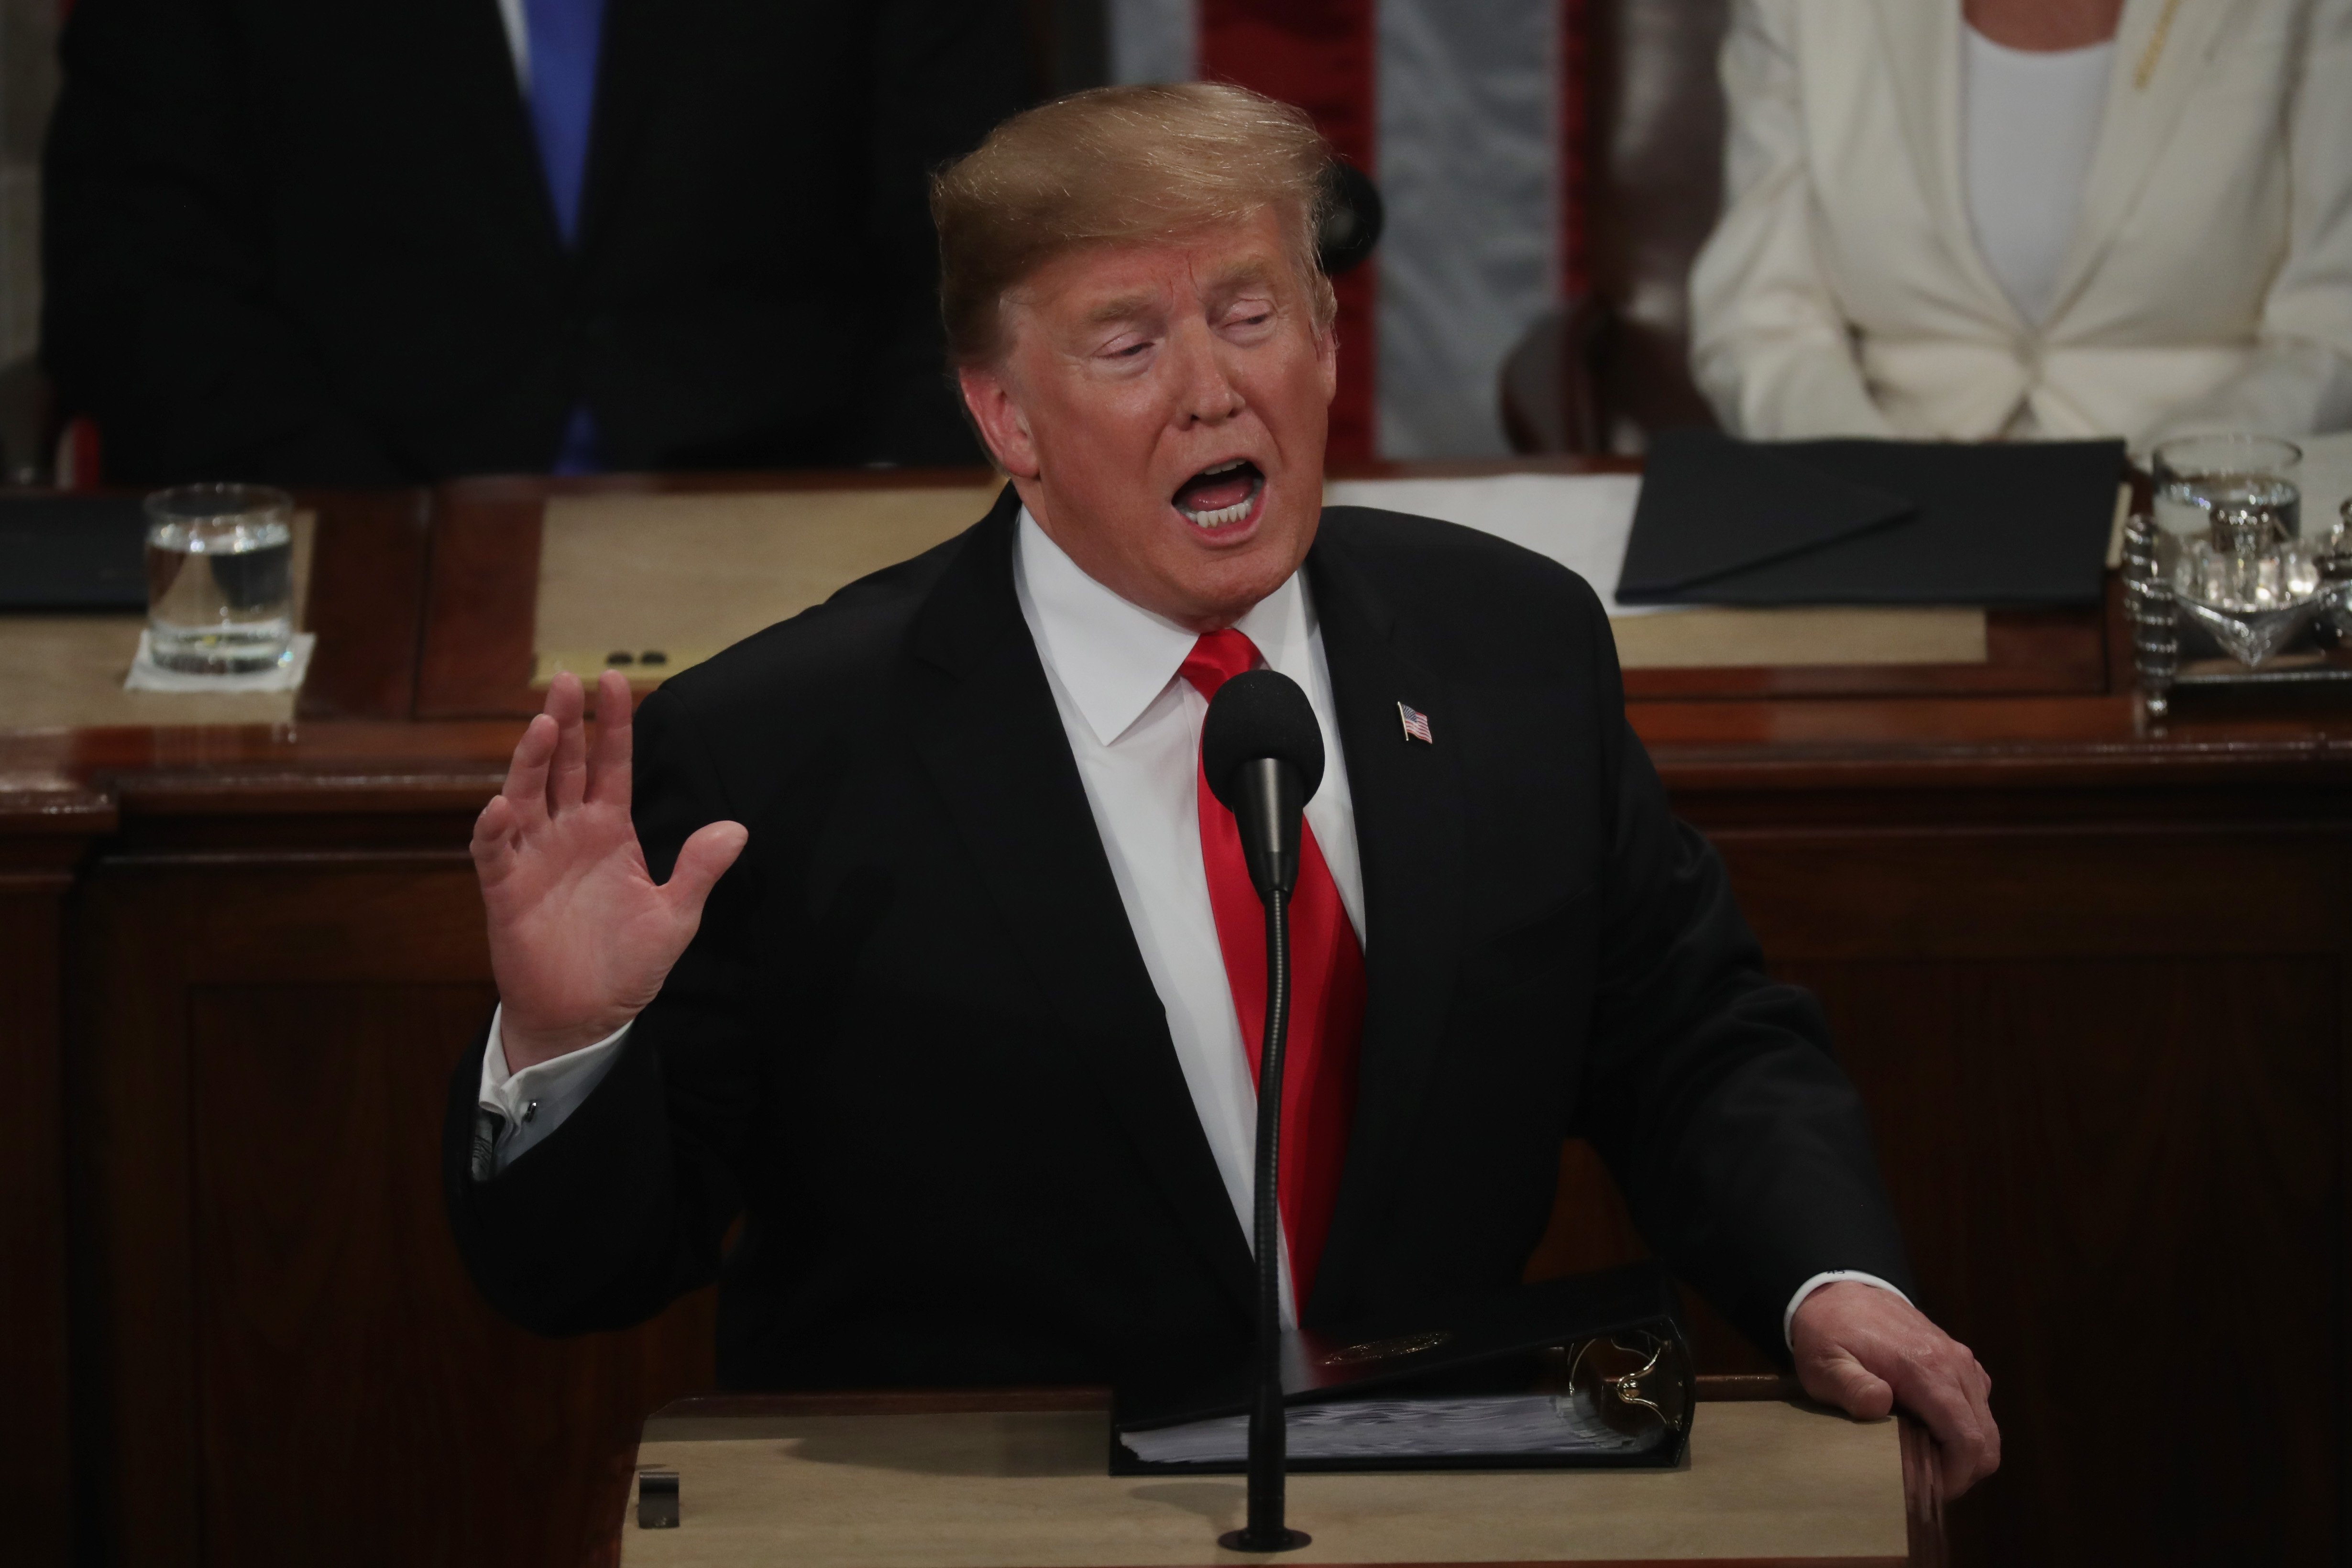 President Donald Trump delivering a speech during the State of the Union address | Photo: Getty Images